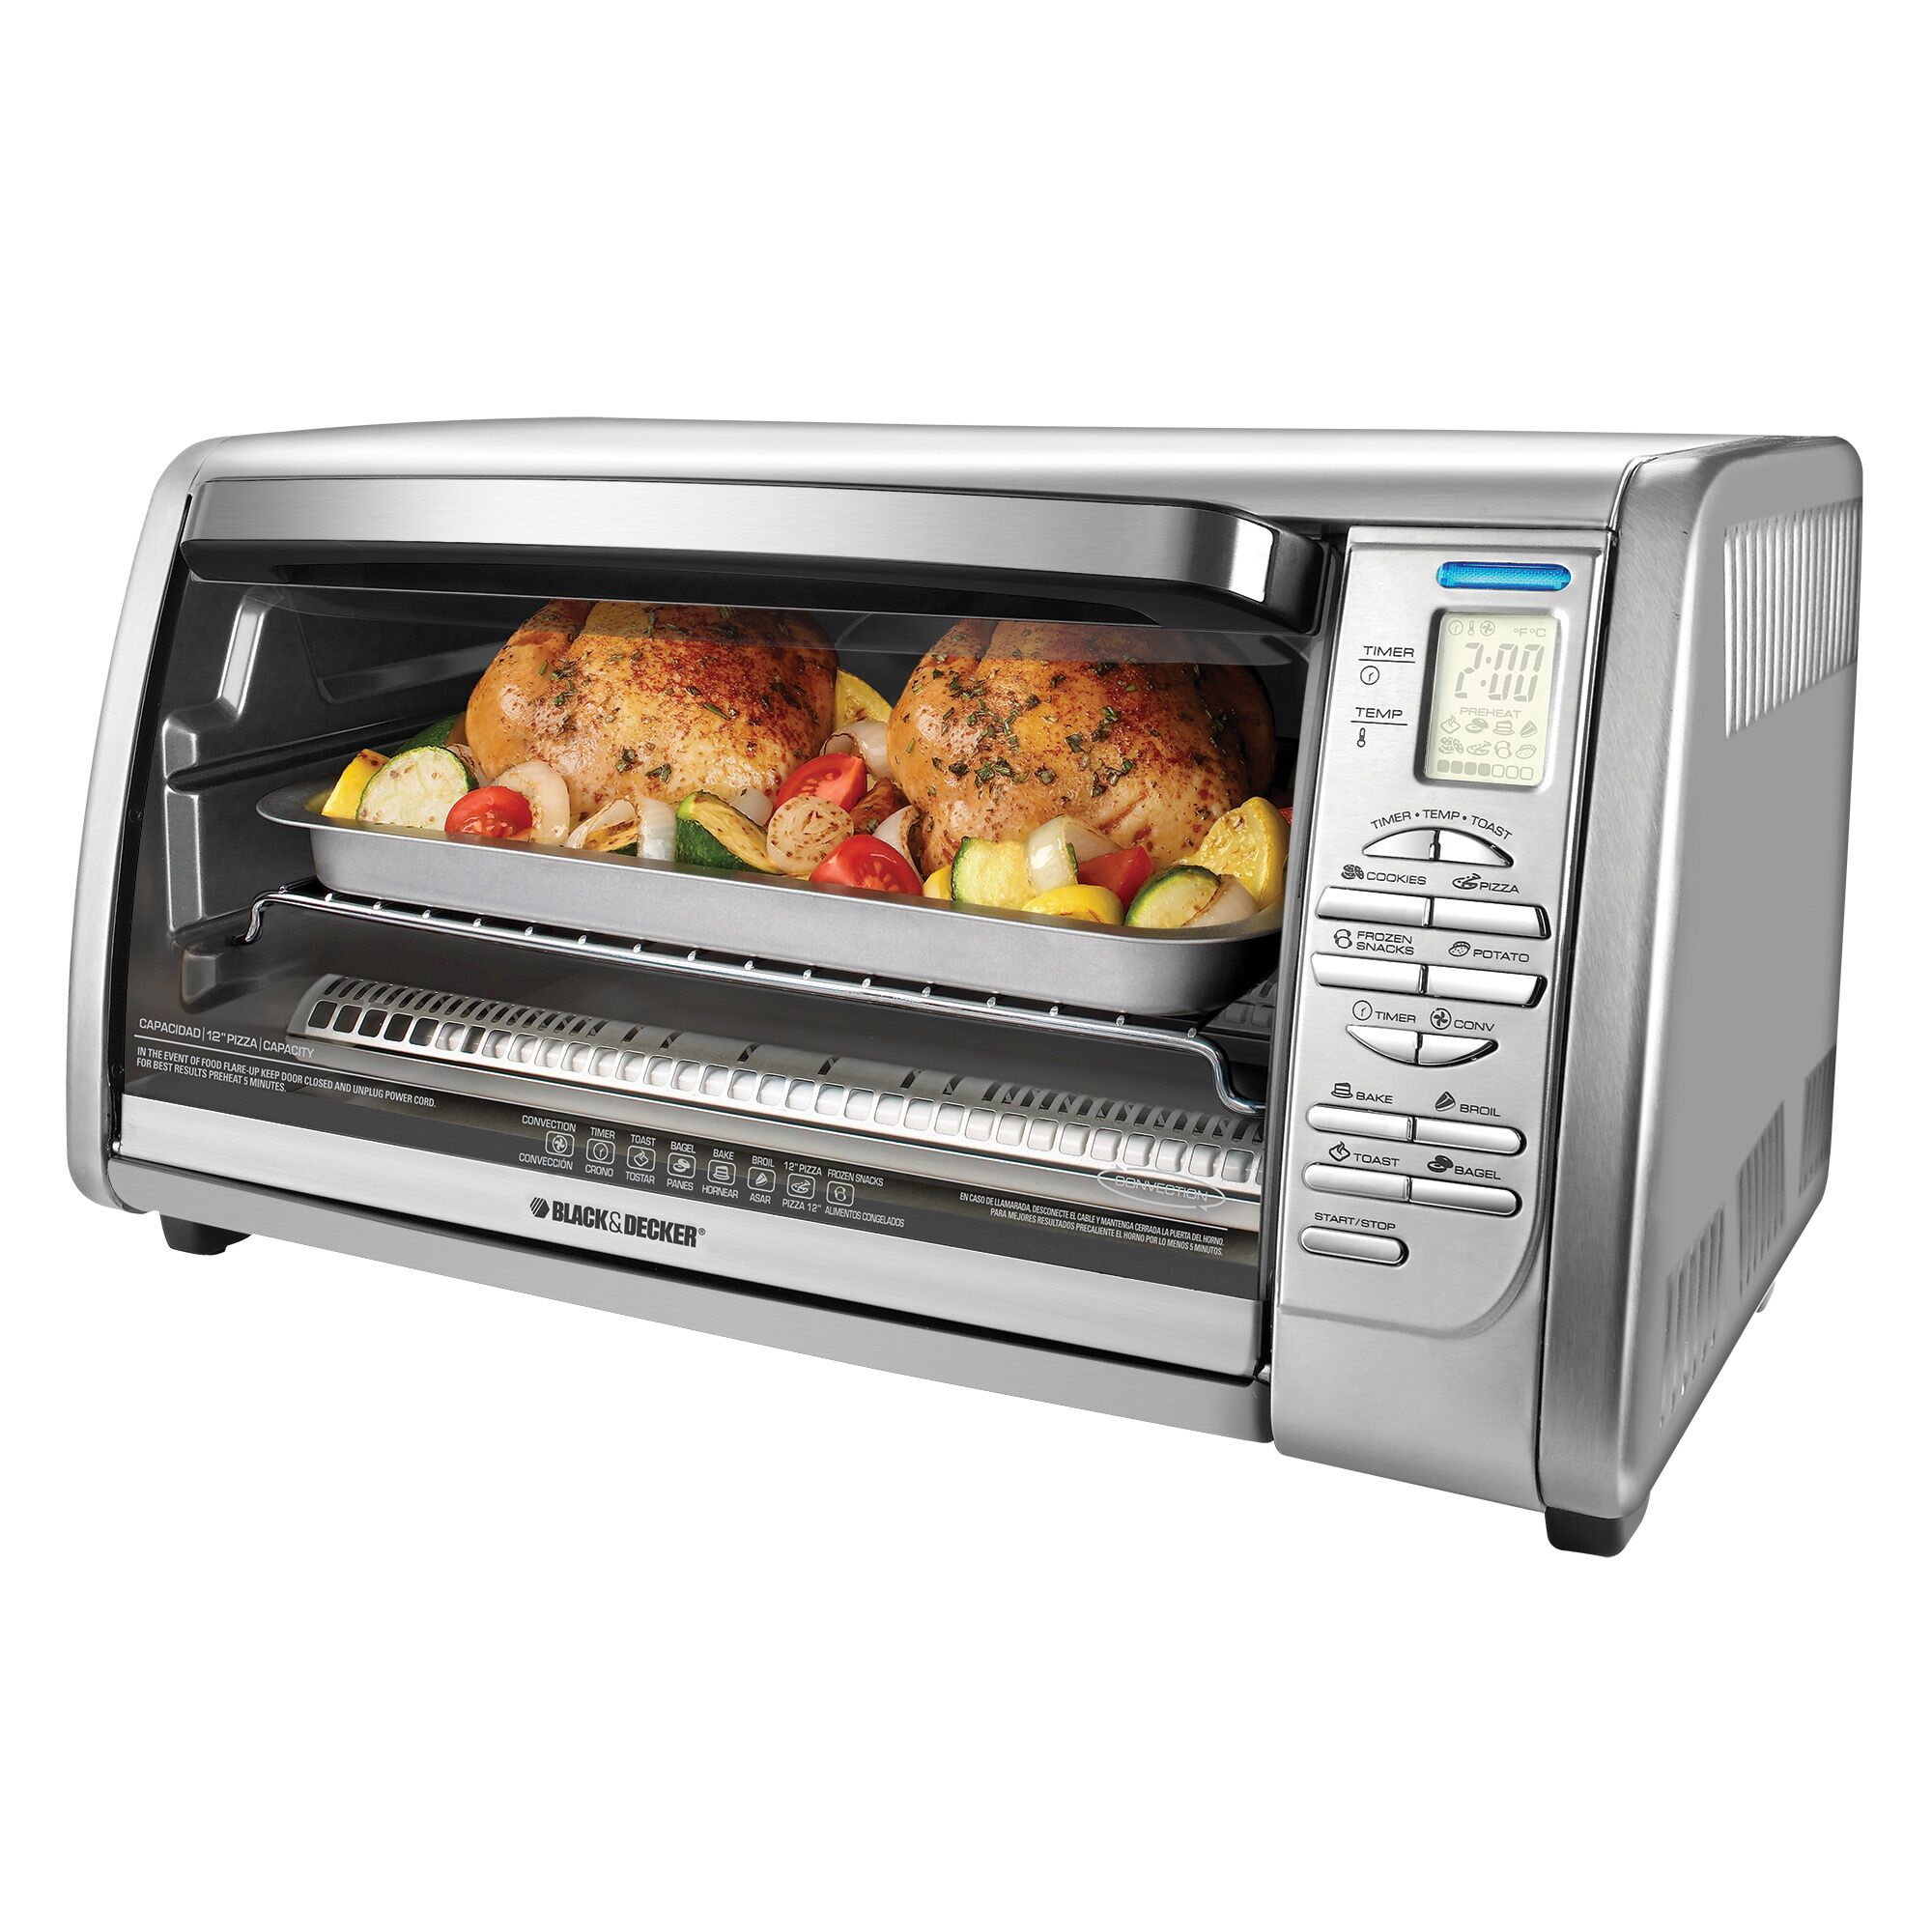 Profile of countertop convection toaster oven with baked chicken and vegetables.